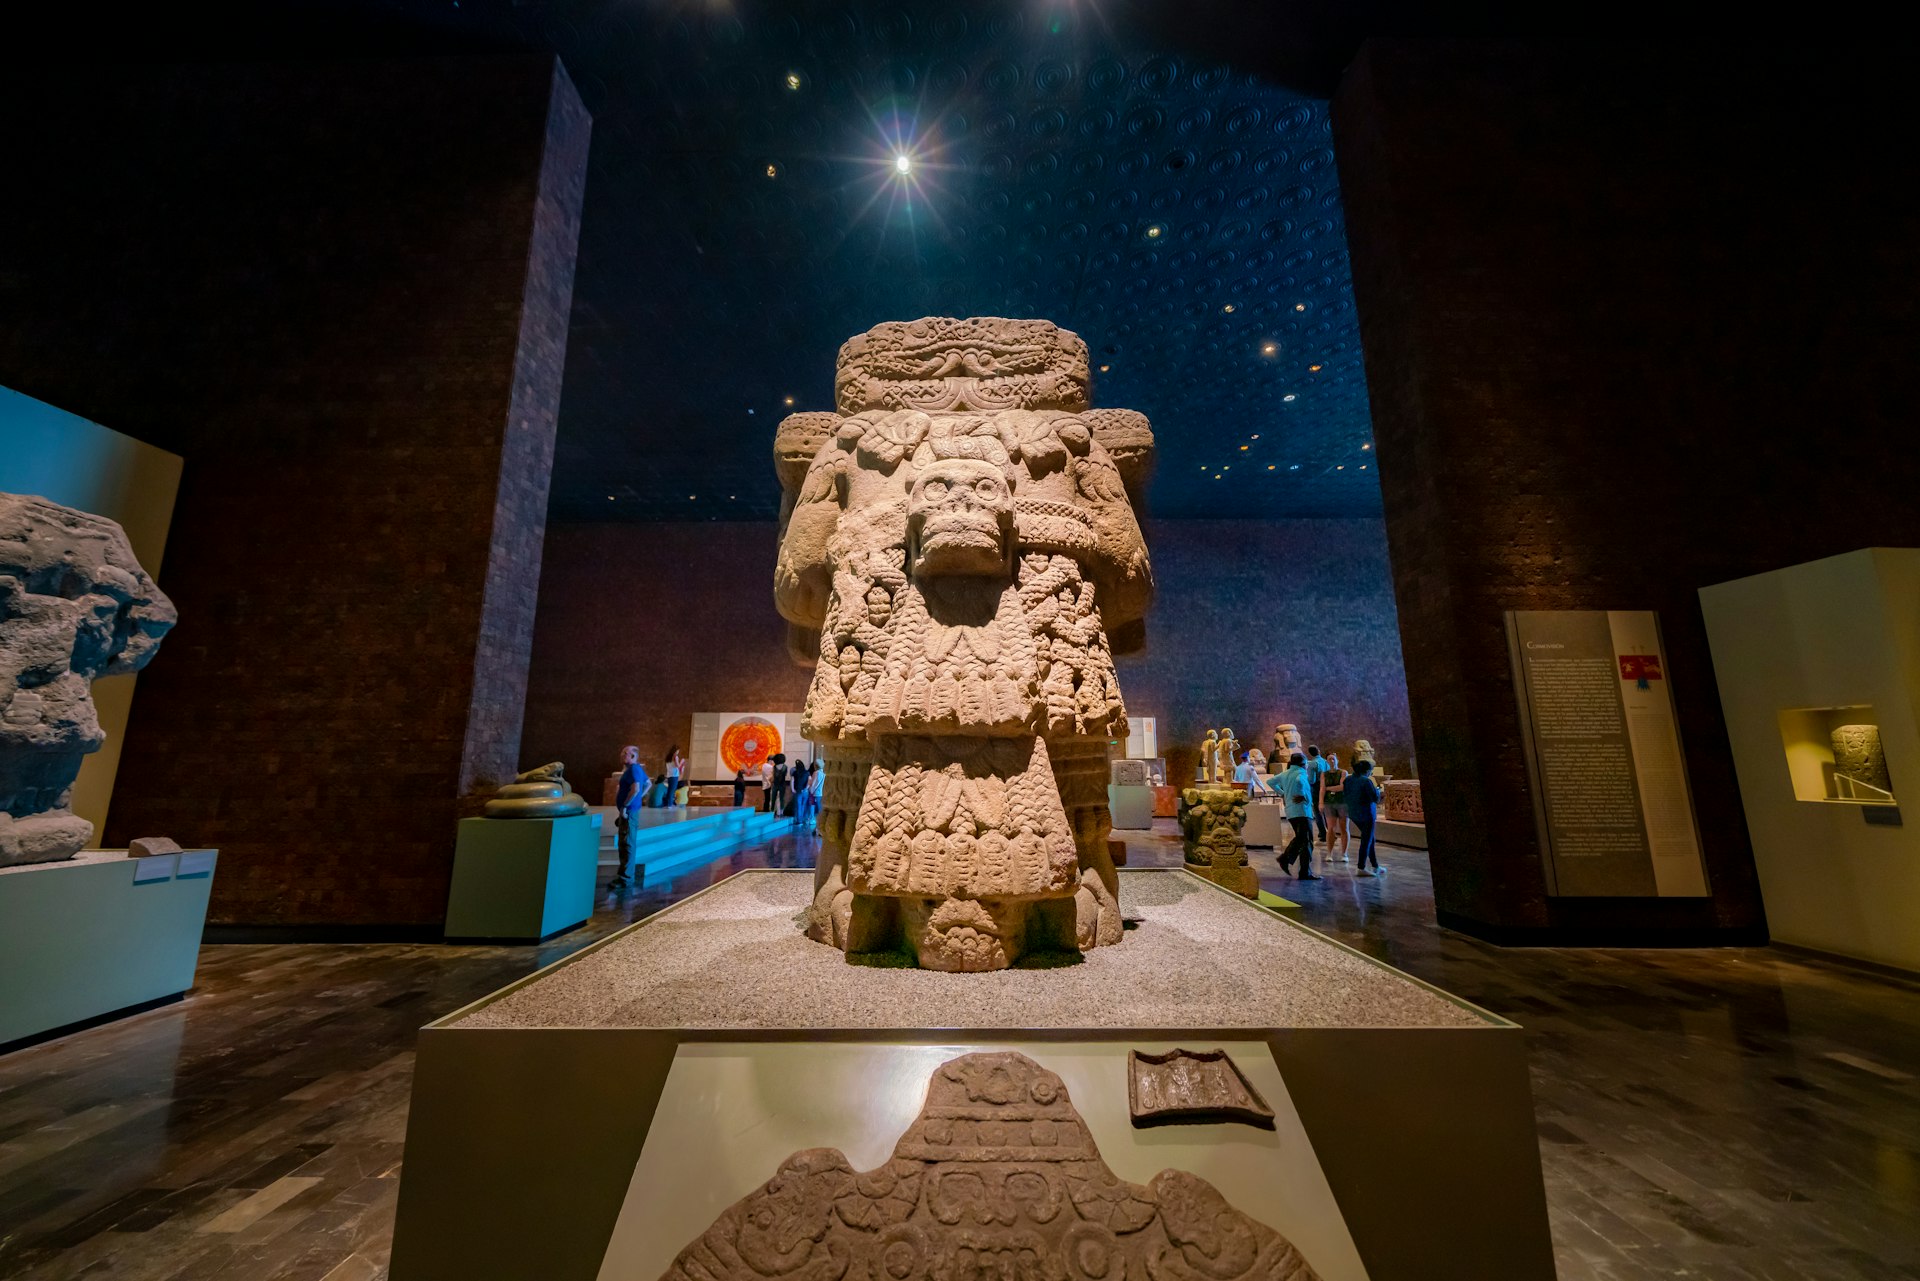 Artworks on display at the National Museum of Anthropology, Mexico City, Mexico